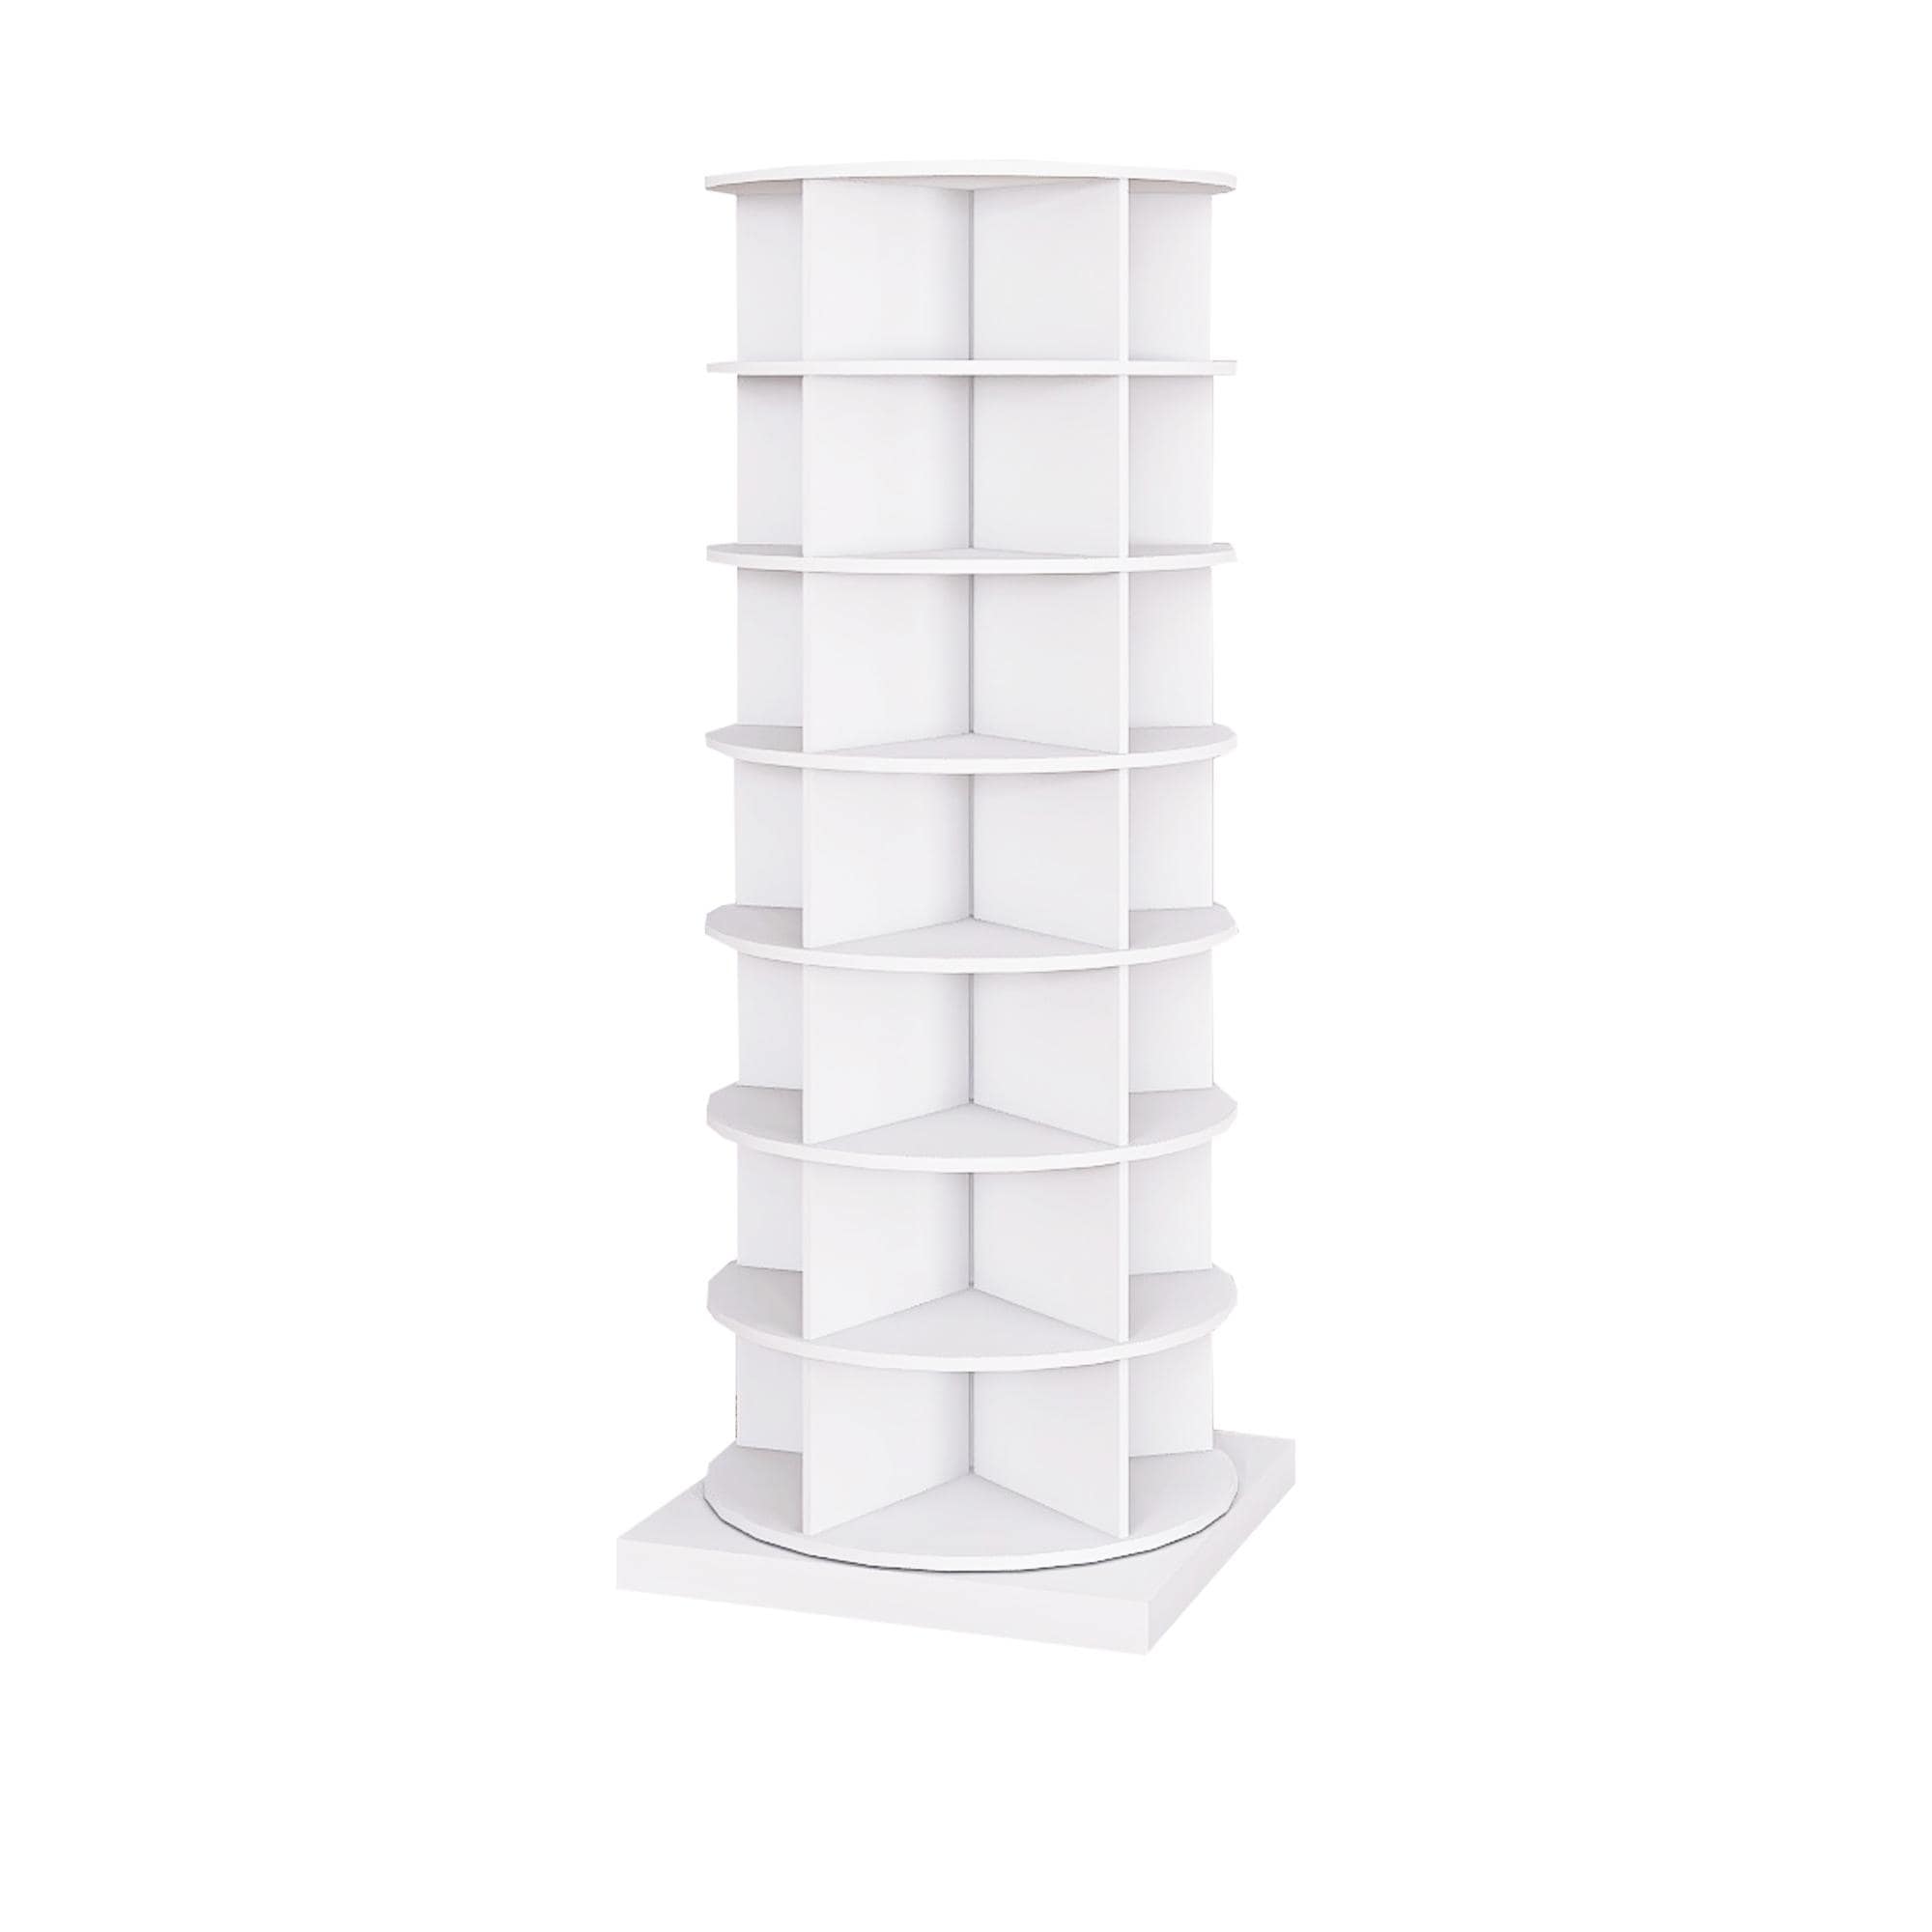 https://ak1.ostkcdn.com/images/products/is/images/direct/7f754029ce3d1da5dd14e2ccd4d5dc8c799d6ae4/360-Rotating-shoe-cabinet-7-layers-Holds-Up-to-35-Paris-of-Shoes.jpg